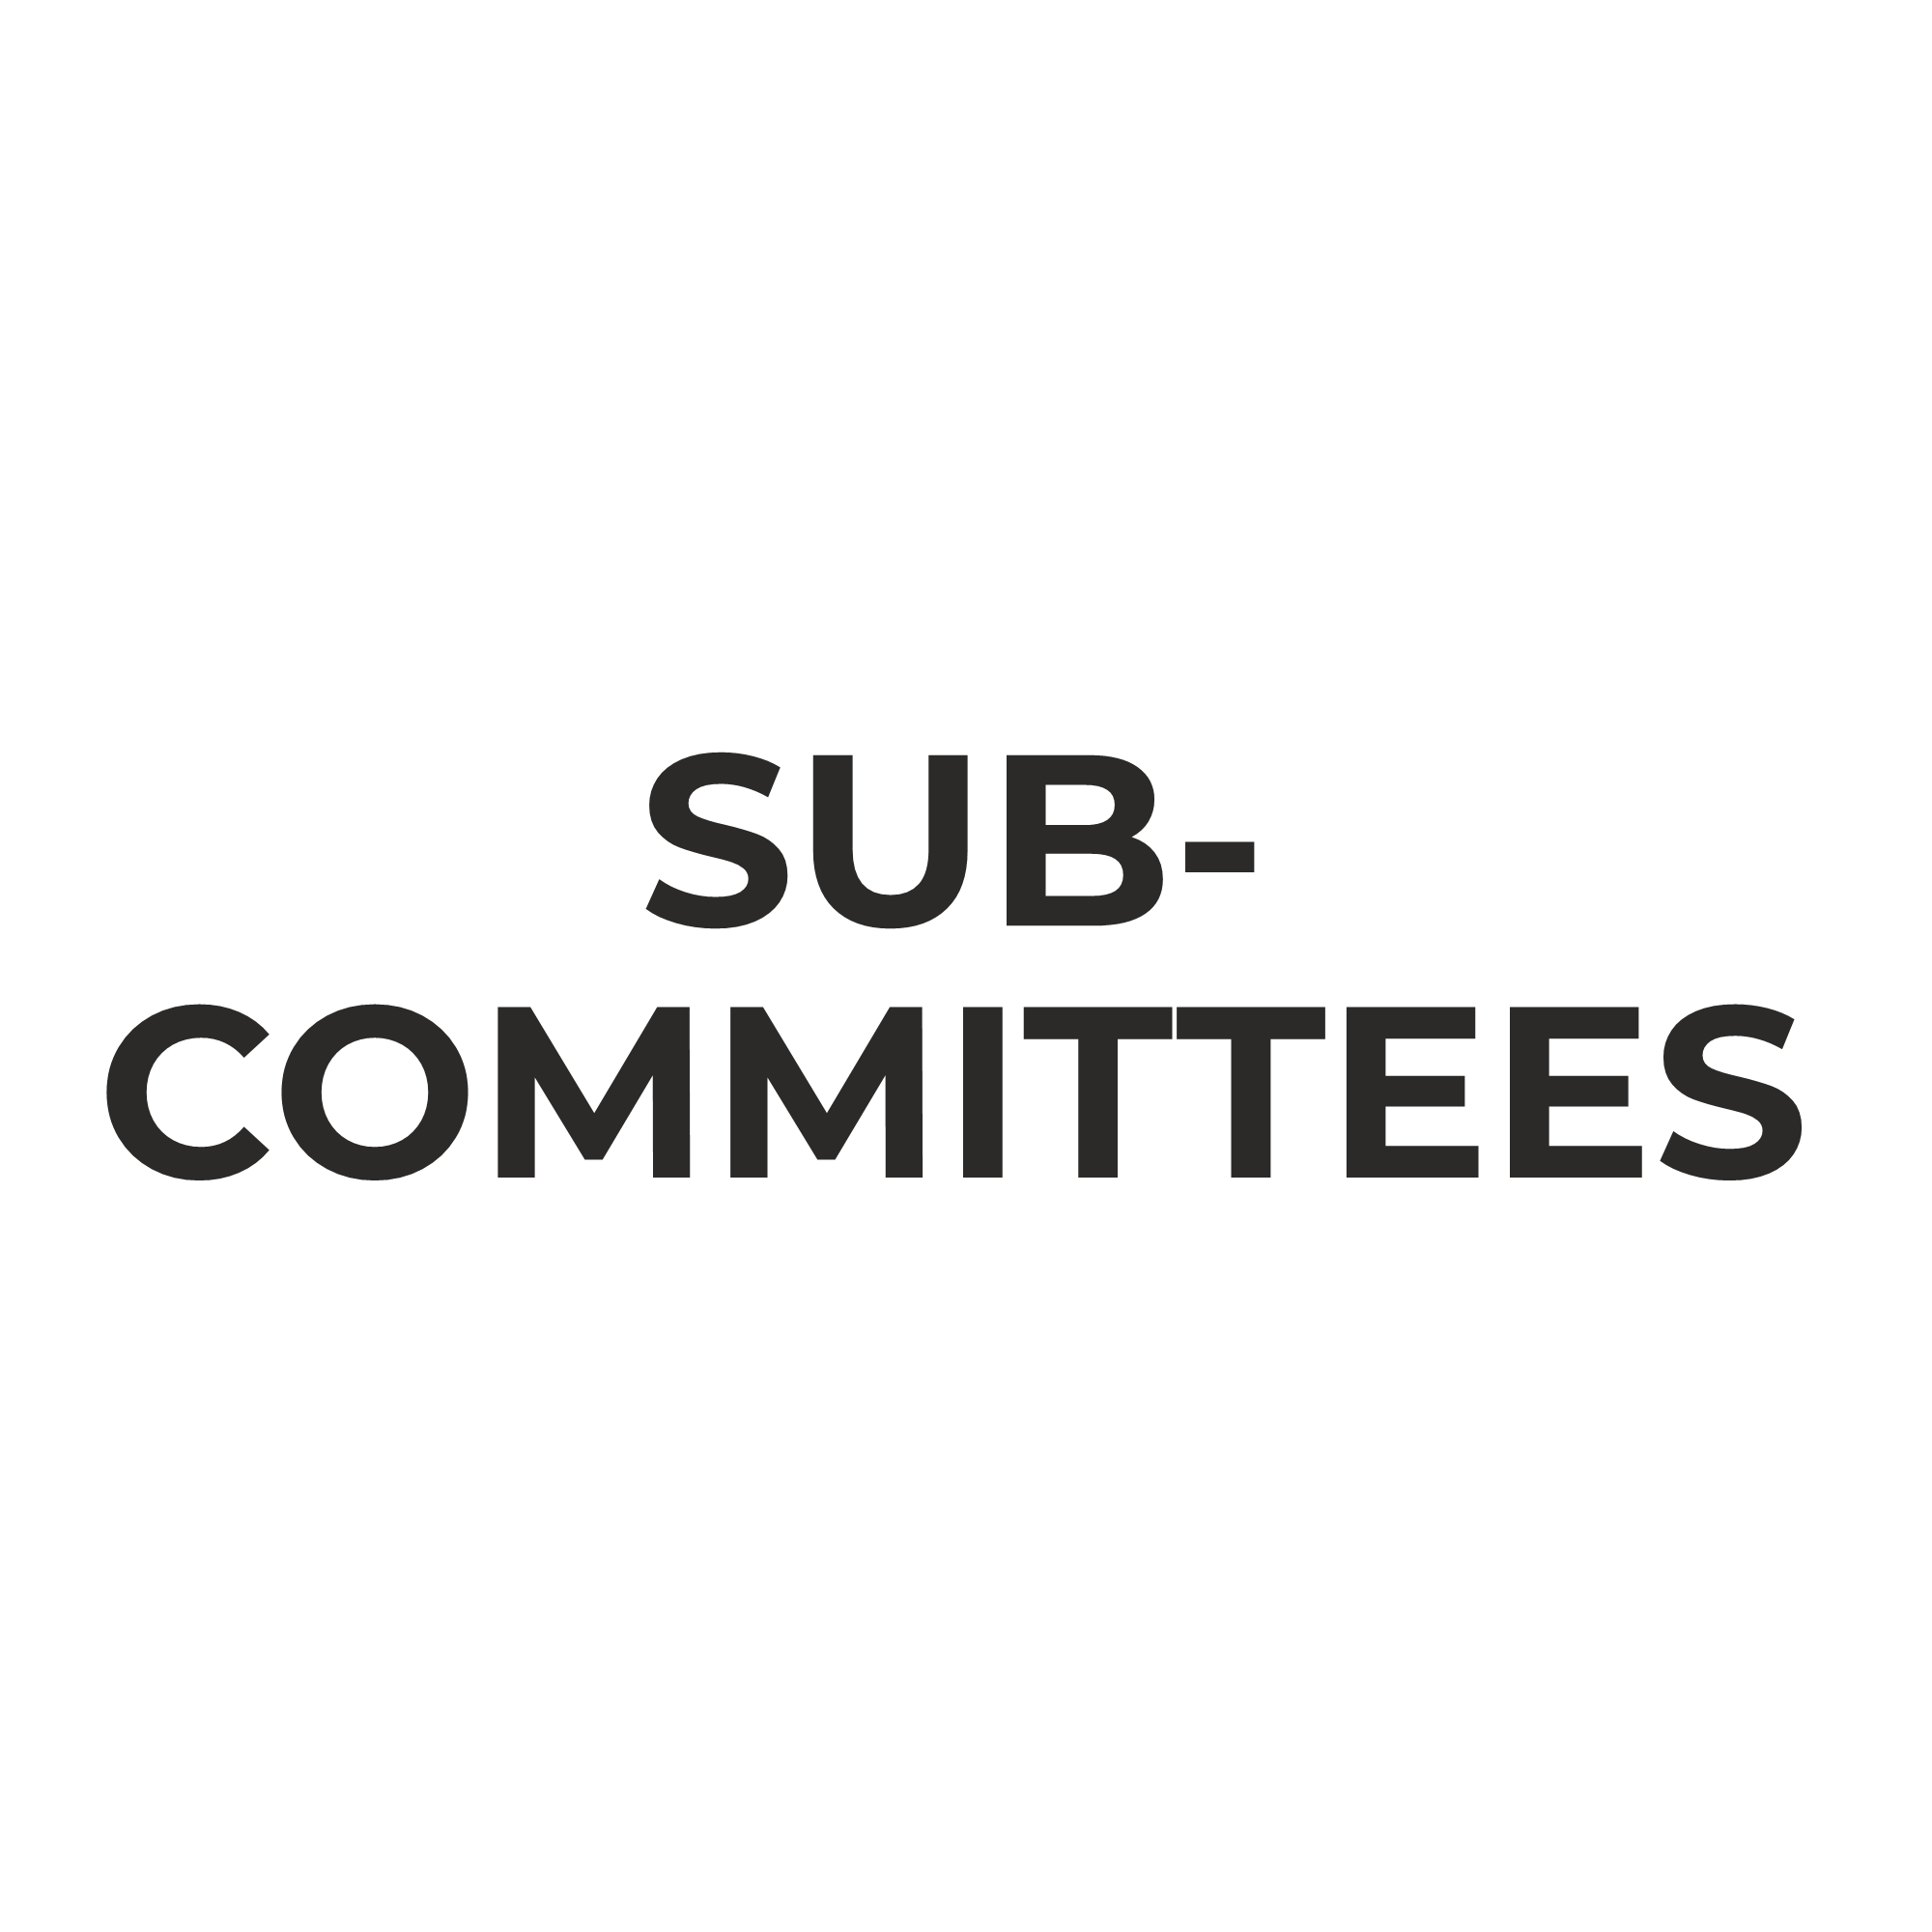 SUBCOMMITTEES